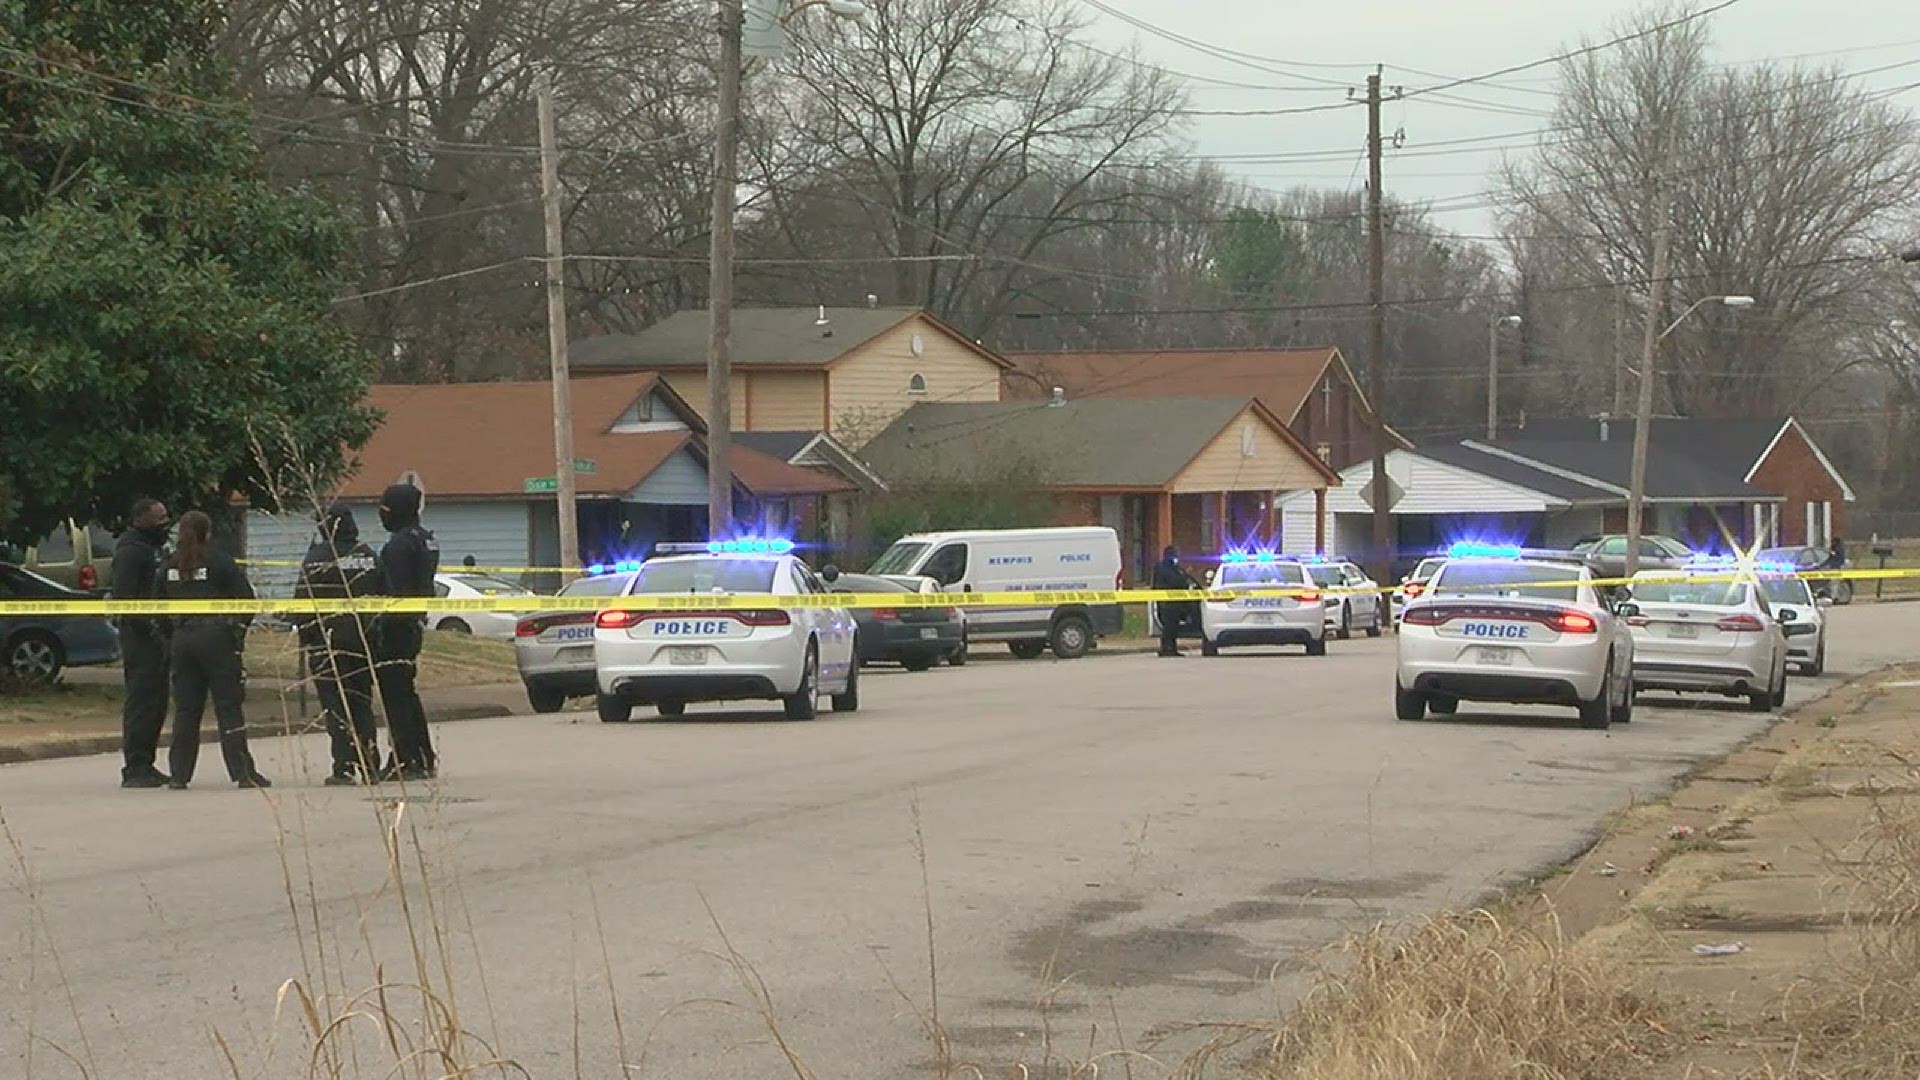 According to Memphis police, the shooting happened at Old Horn Lake Road near Dixie Road.